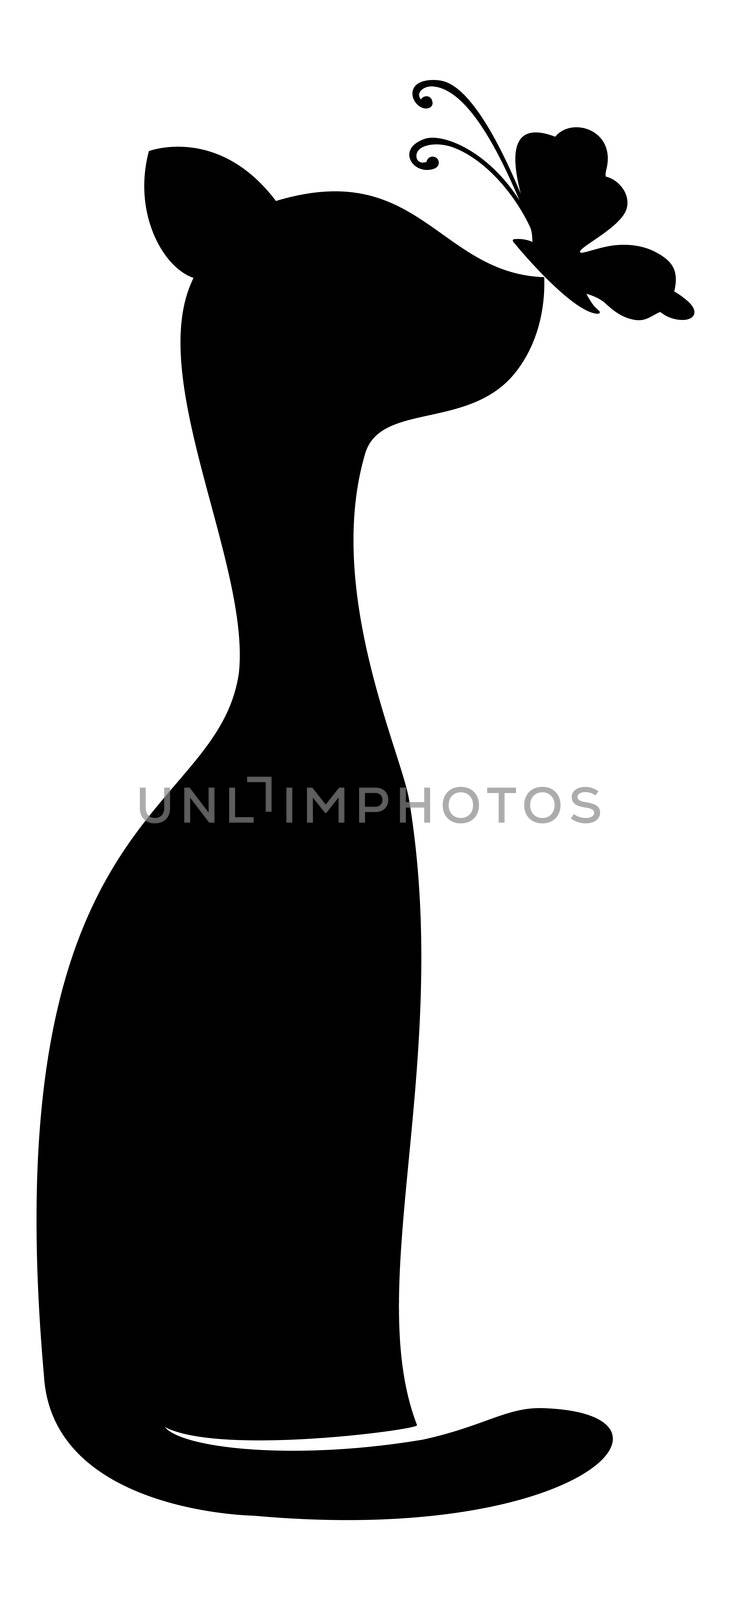 Cartoon, animals friends: cat and butterfly. Black silhouettes on white background.